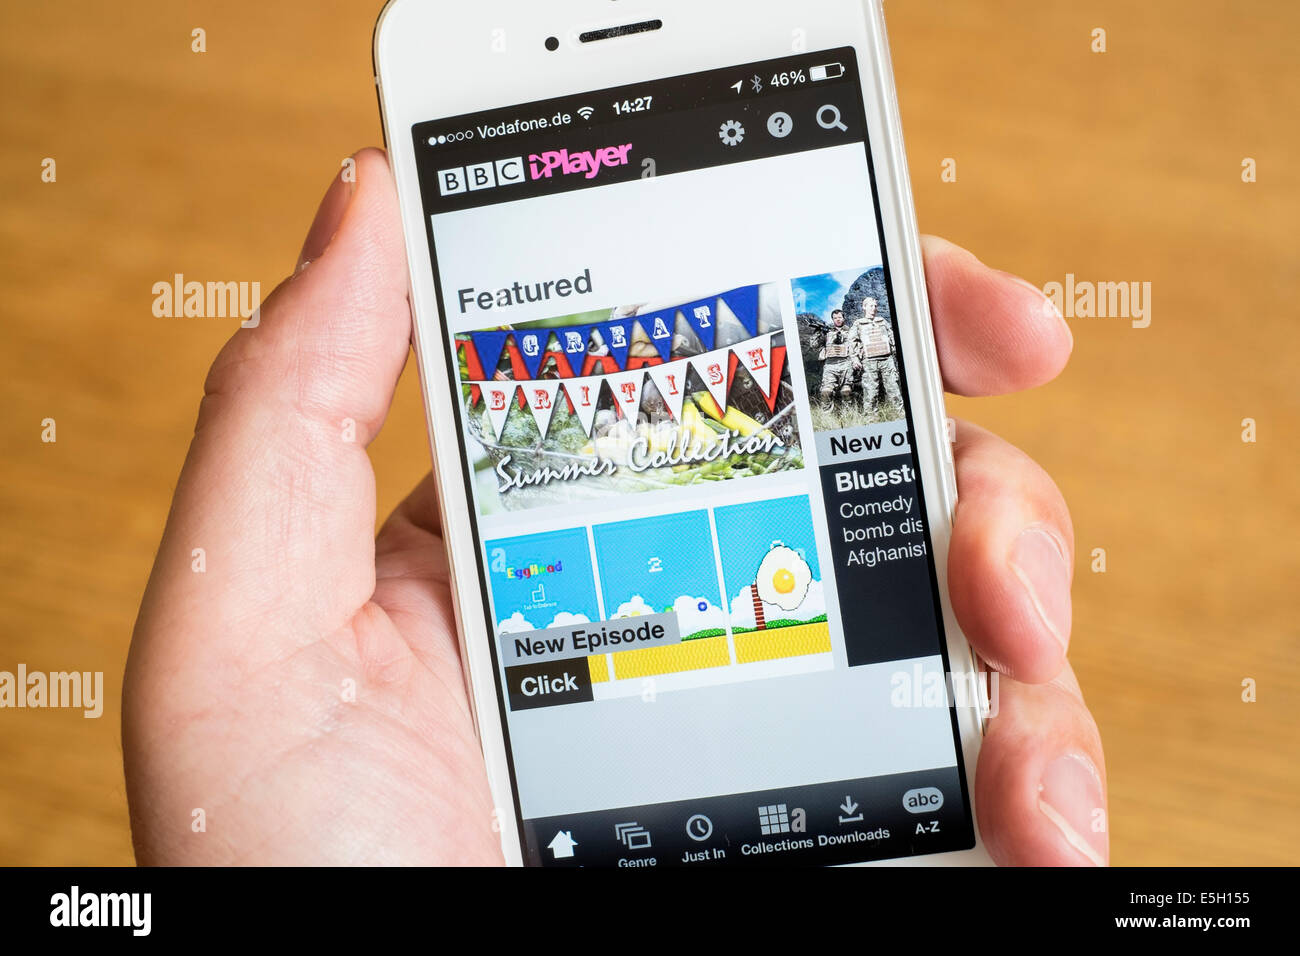 Using BBC iPlayer television catchup app to watch television programmes on iPhone smart phone Stock Photo